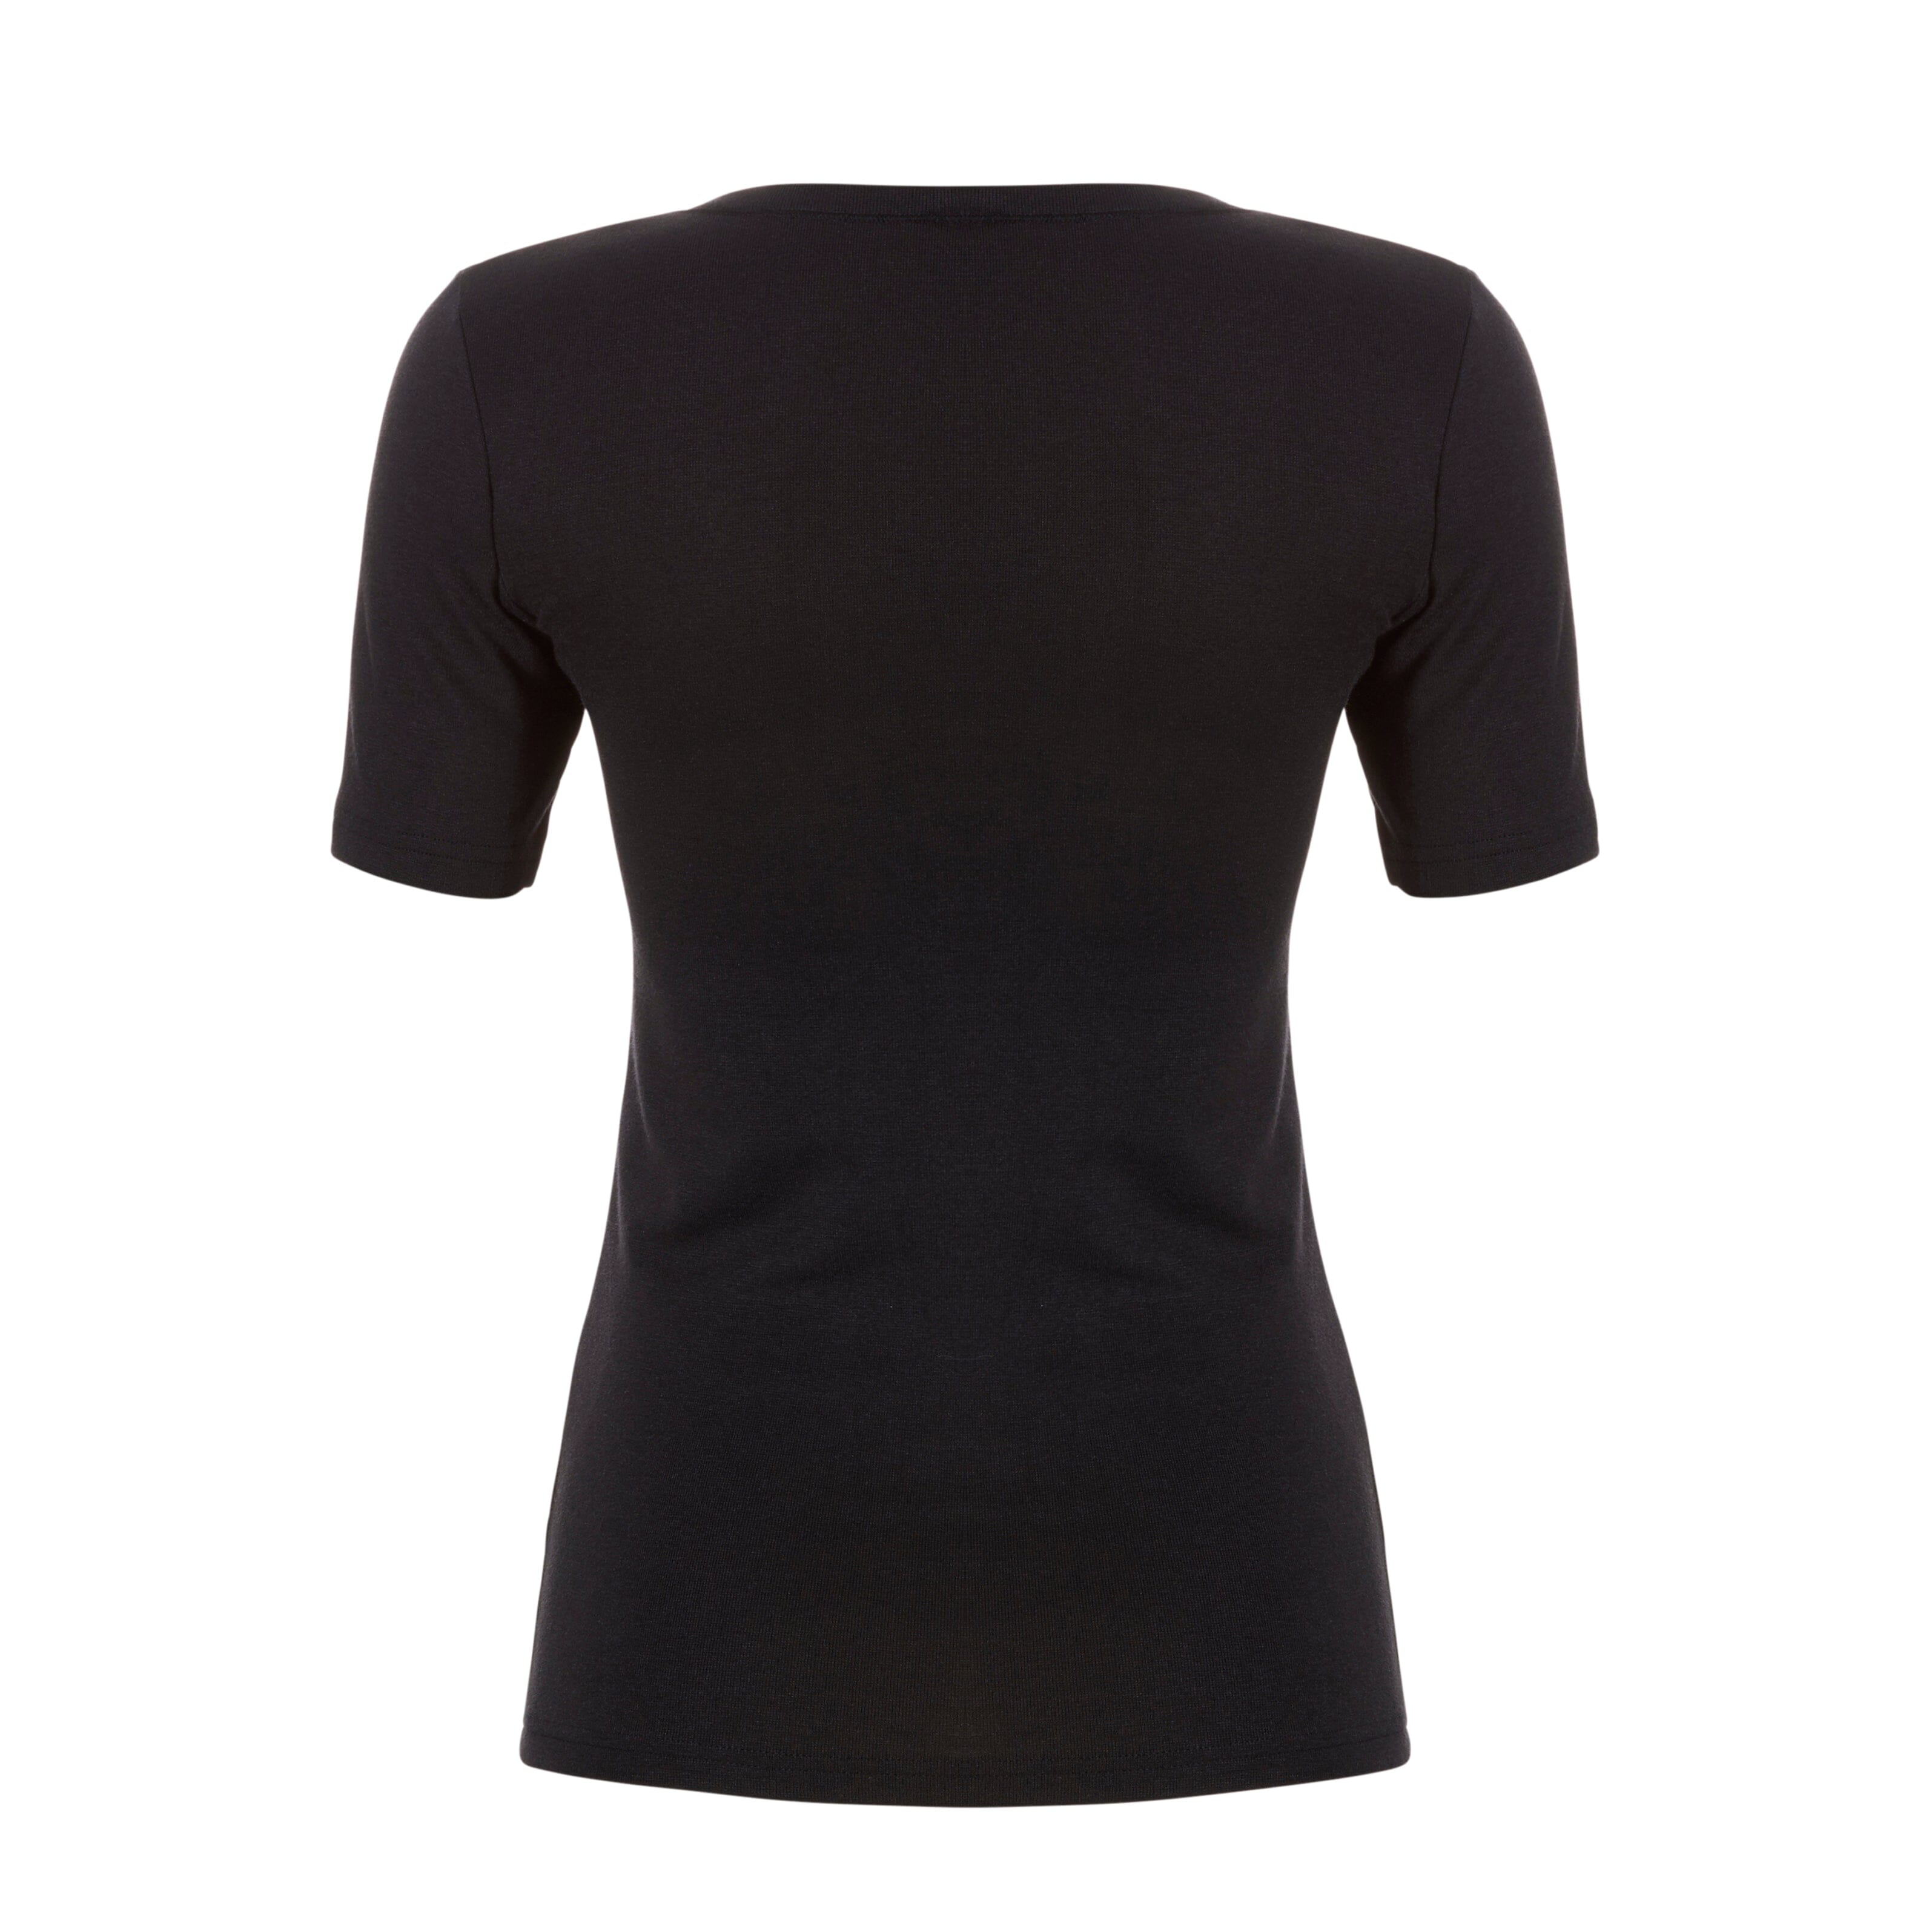 Ten Cate - 30239 - Thermo T-shirt Dames - Black Thermo Ondergoed Ten Cate 